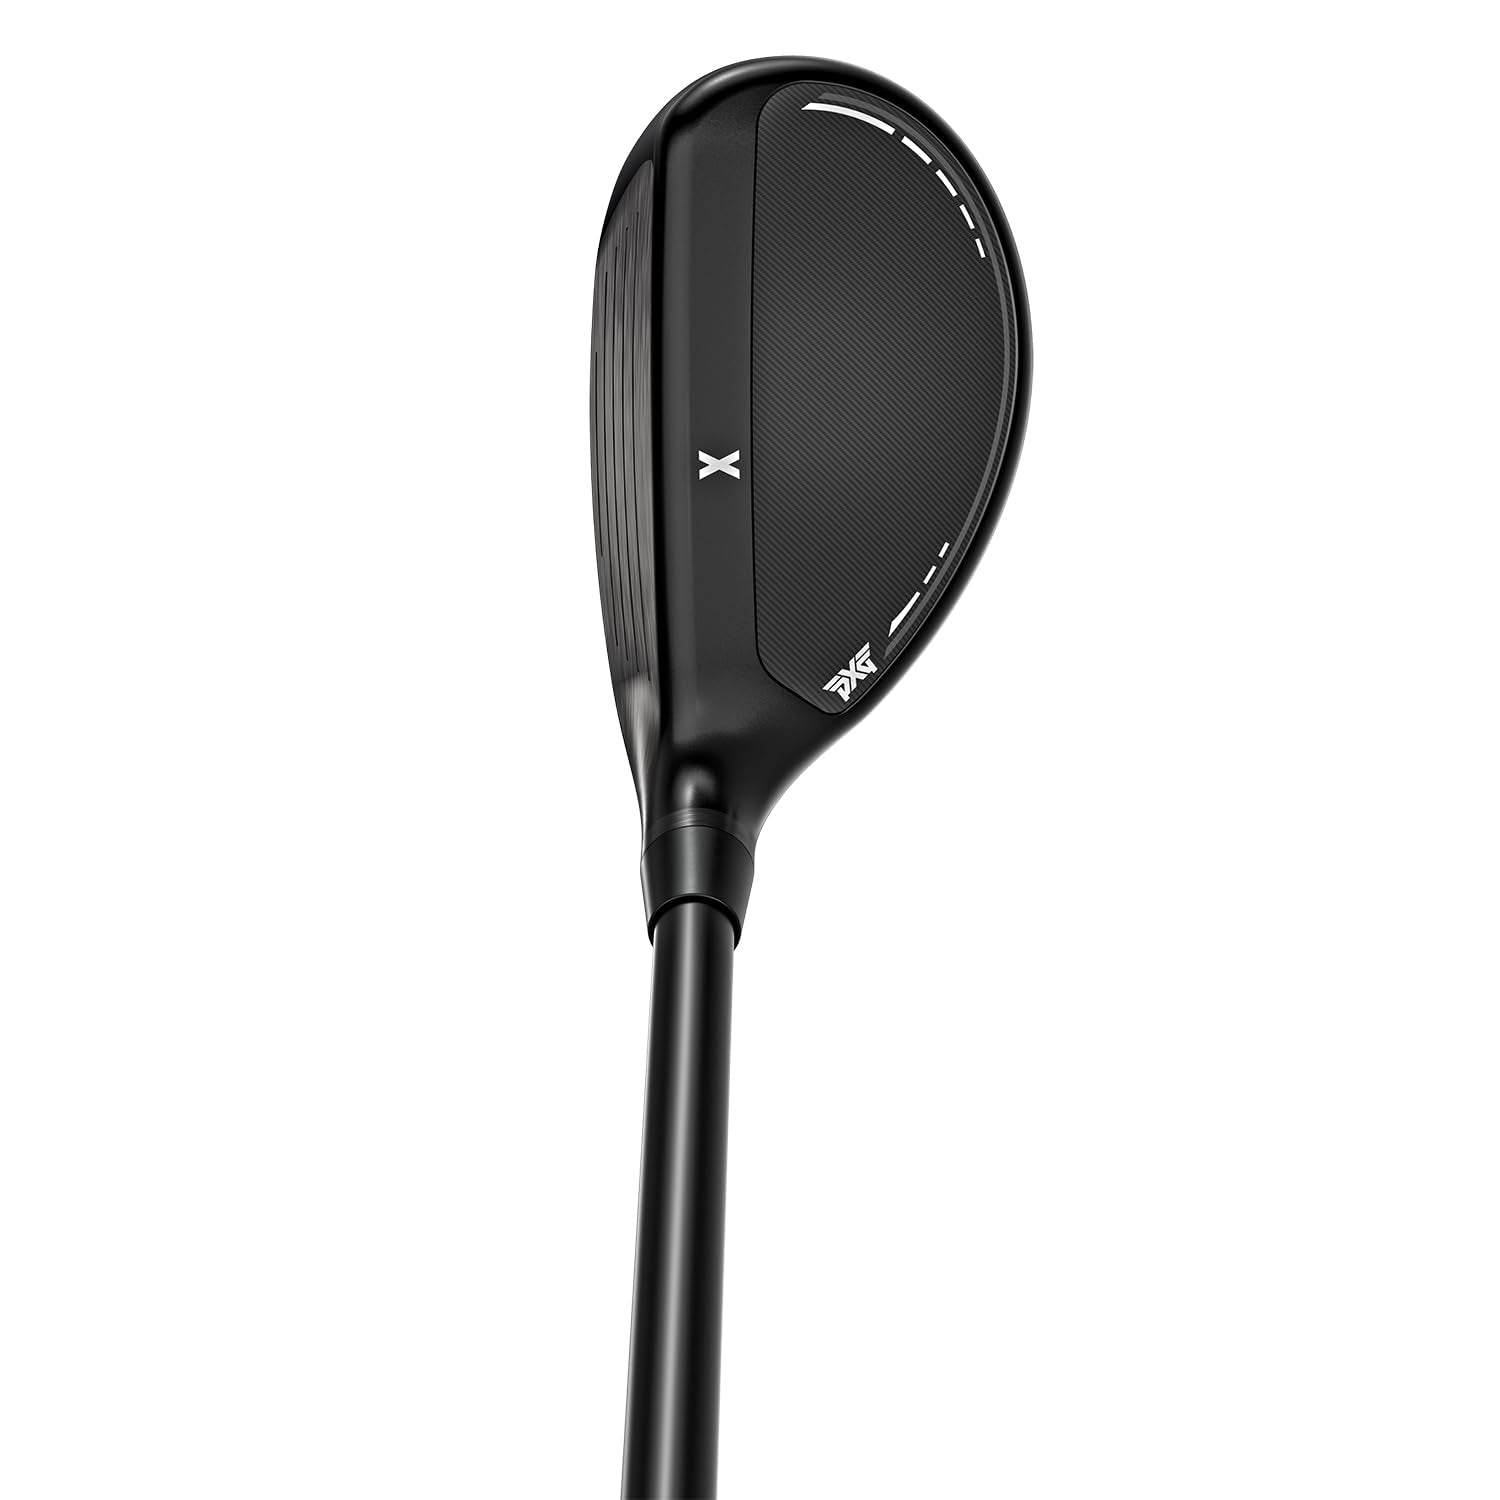 PXG Hybrid Golf Club - 0311 GEN6 Right Handed Hybrid Club in 19, 22, or 25 Degree Lofts with Adjustable Loft and Lie Hosel Available in Stiff, Regular, or Senior Flex Graphite Shaft